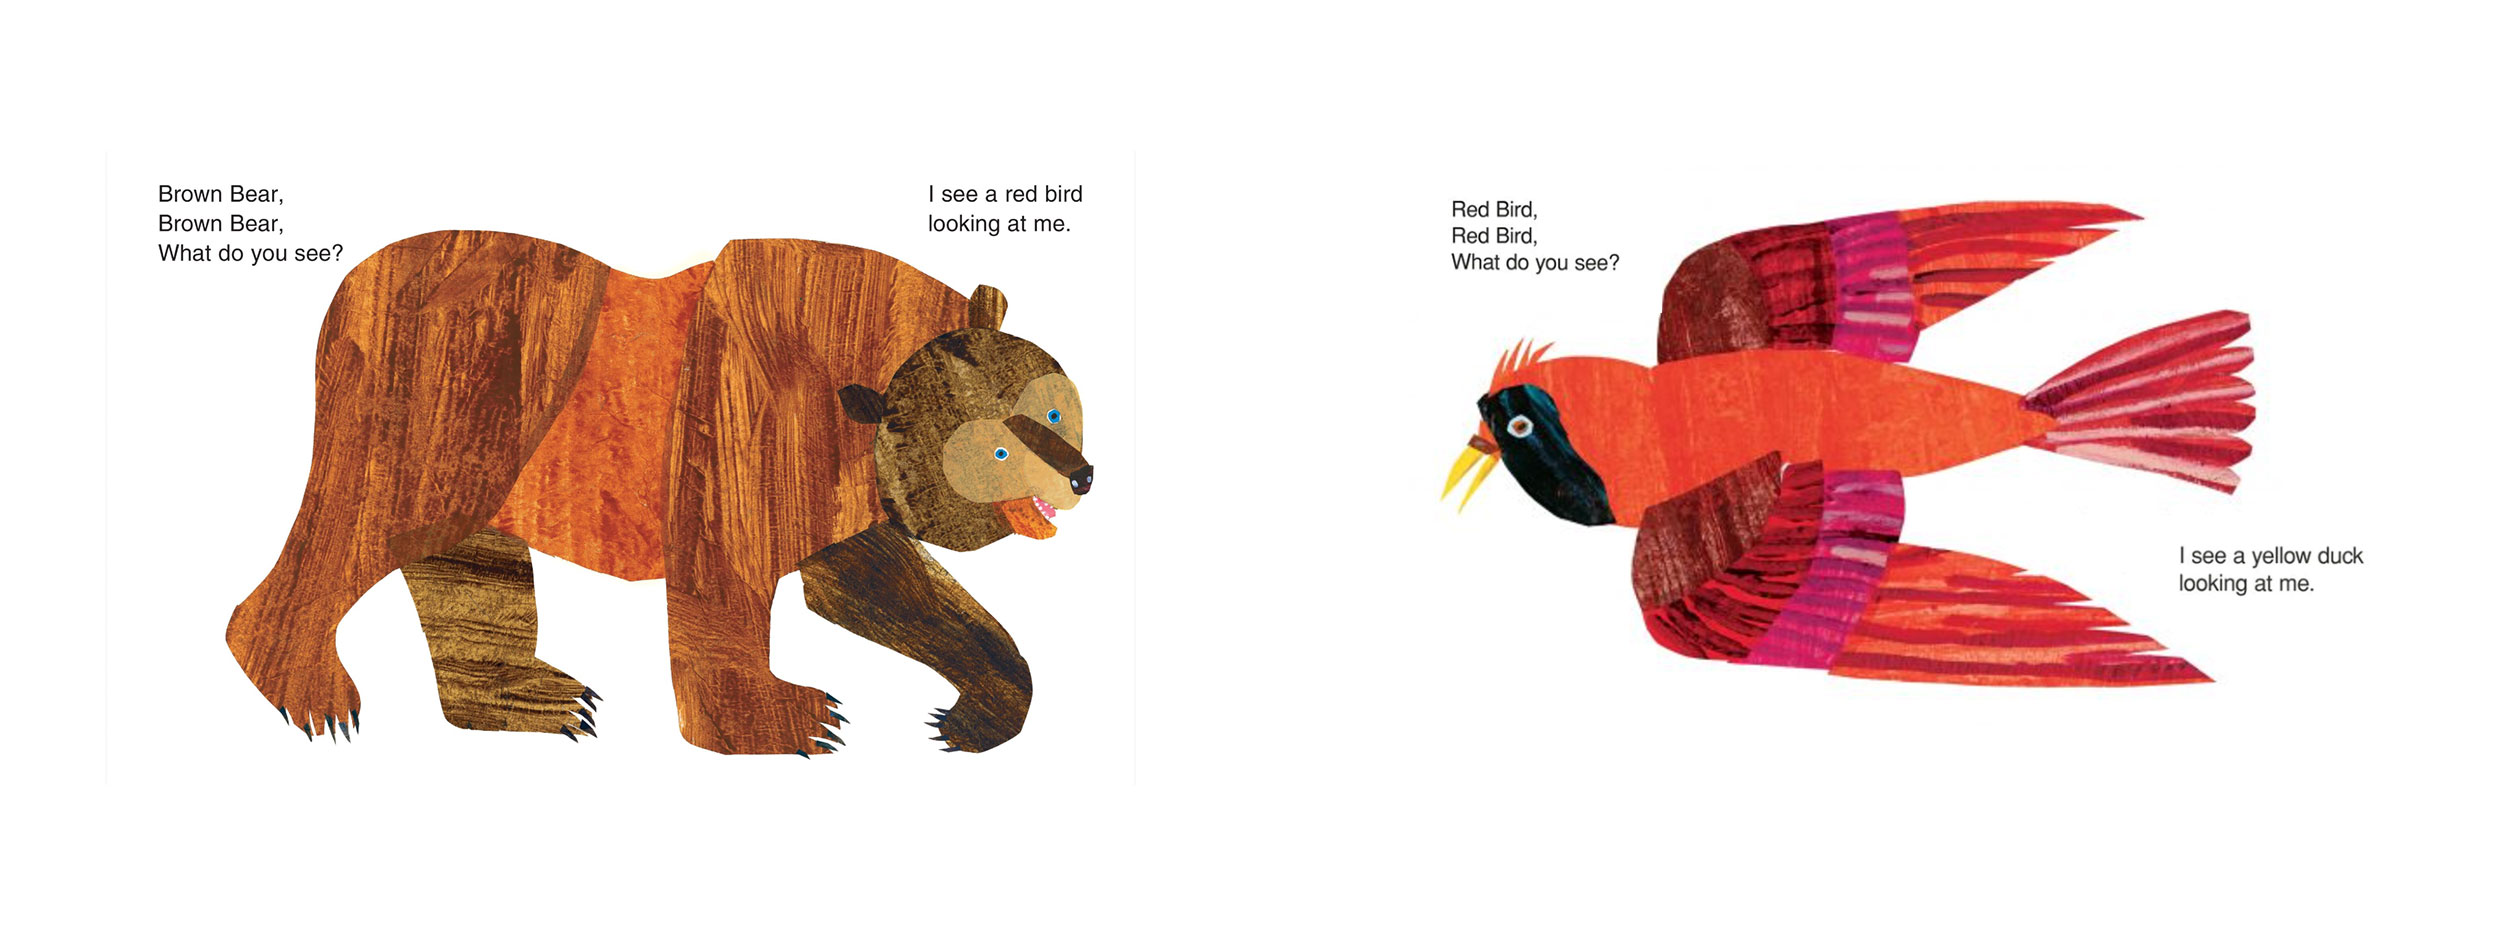 two illustrations from the book Brown Bear, Brown Bear, What Do You See?